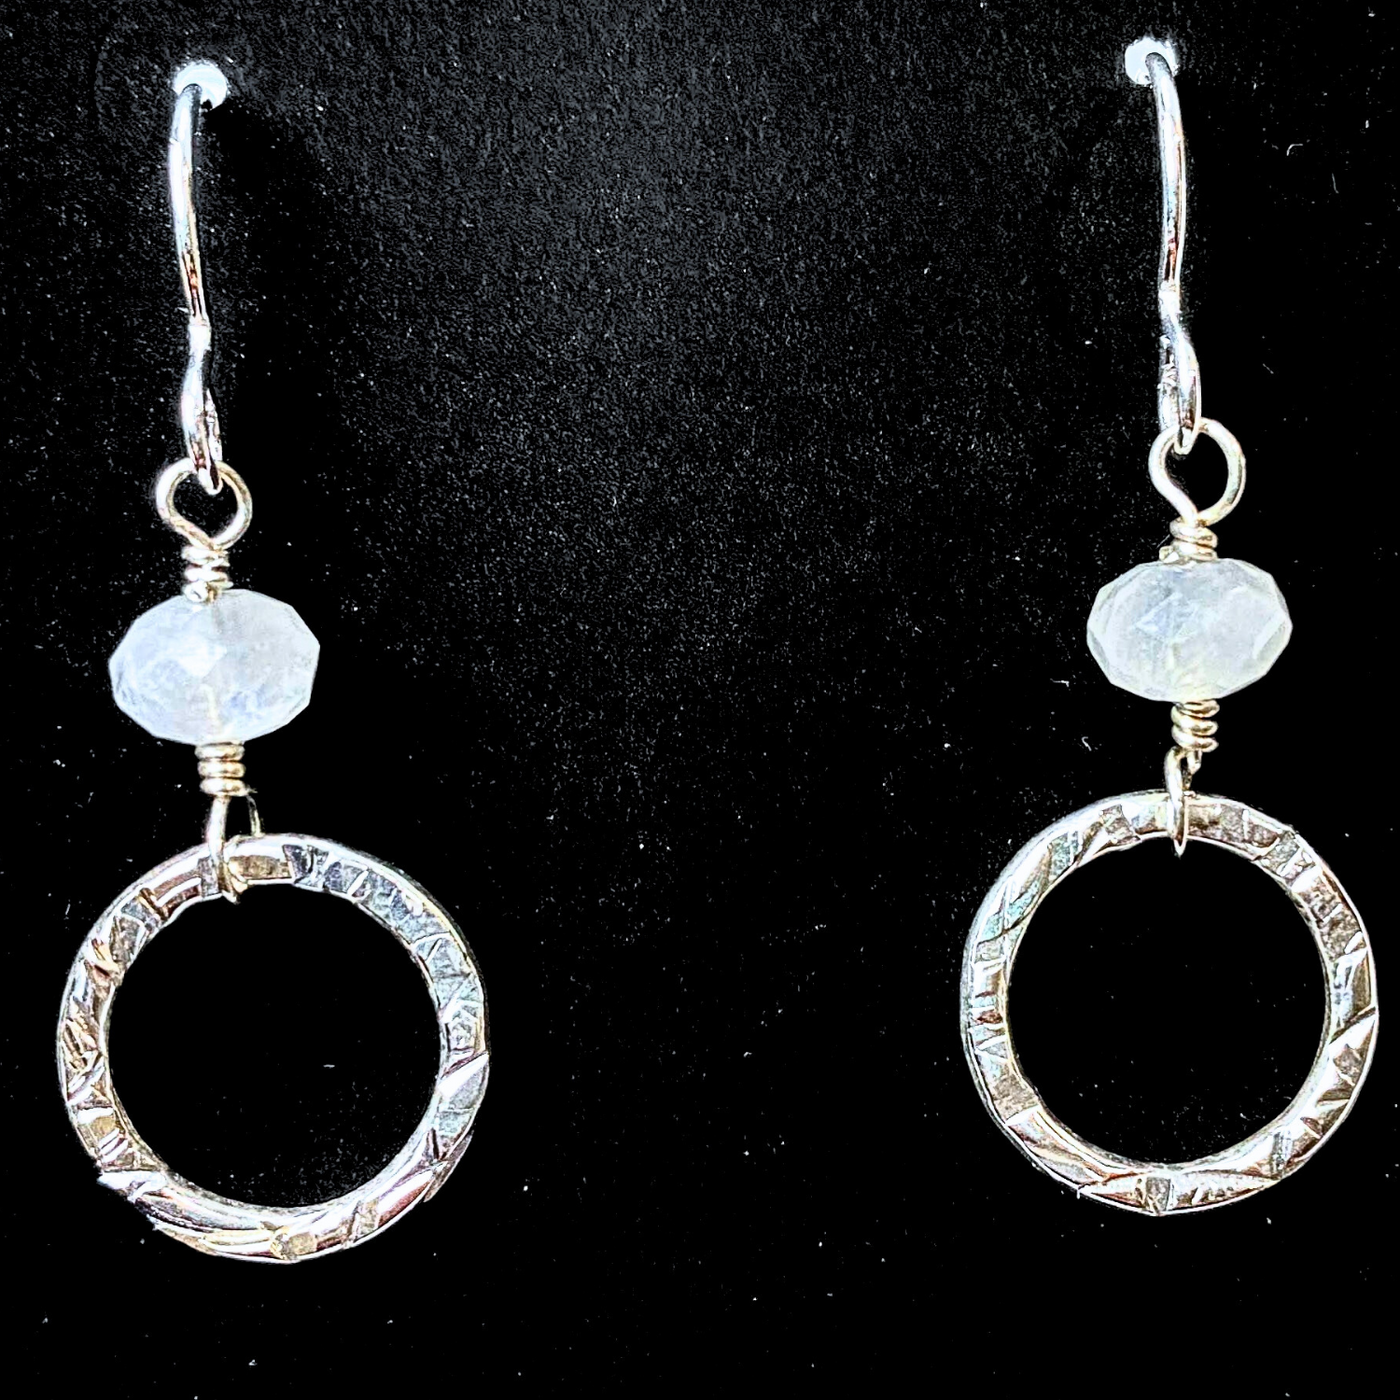 SA-052 Textured Ring w/Faceted Moonstone Drop Earrings